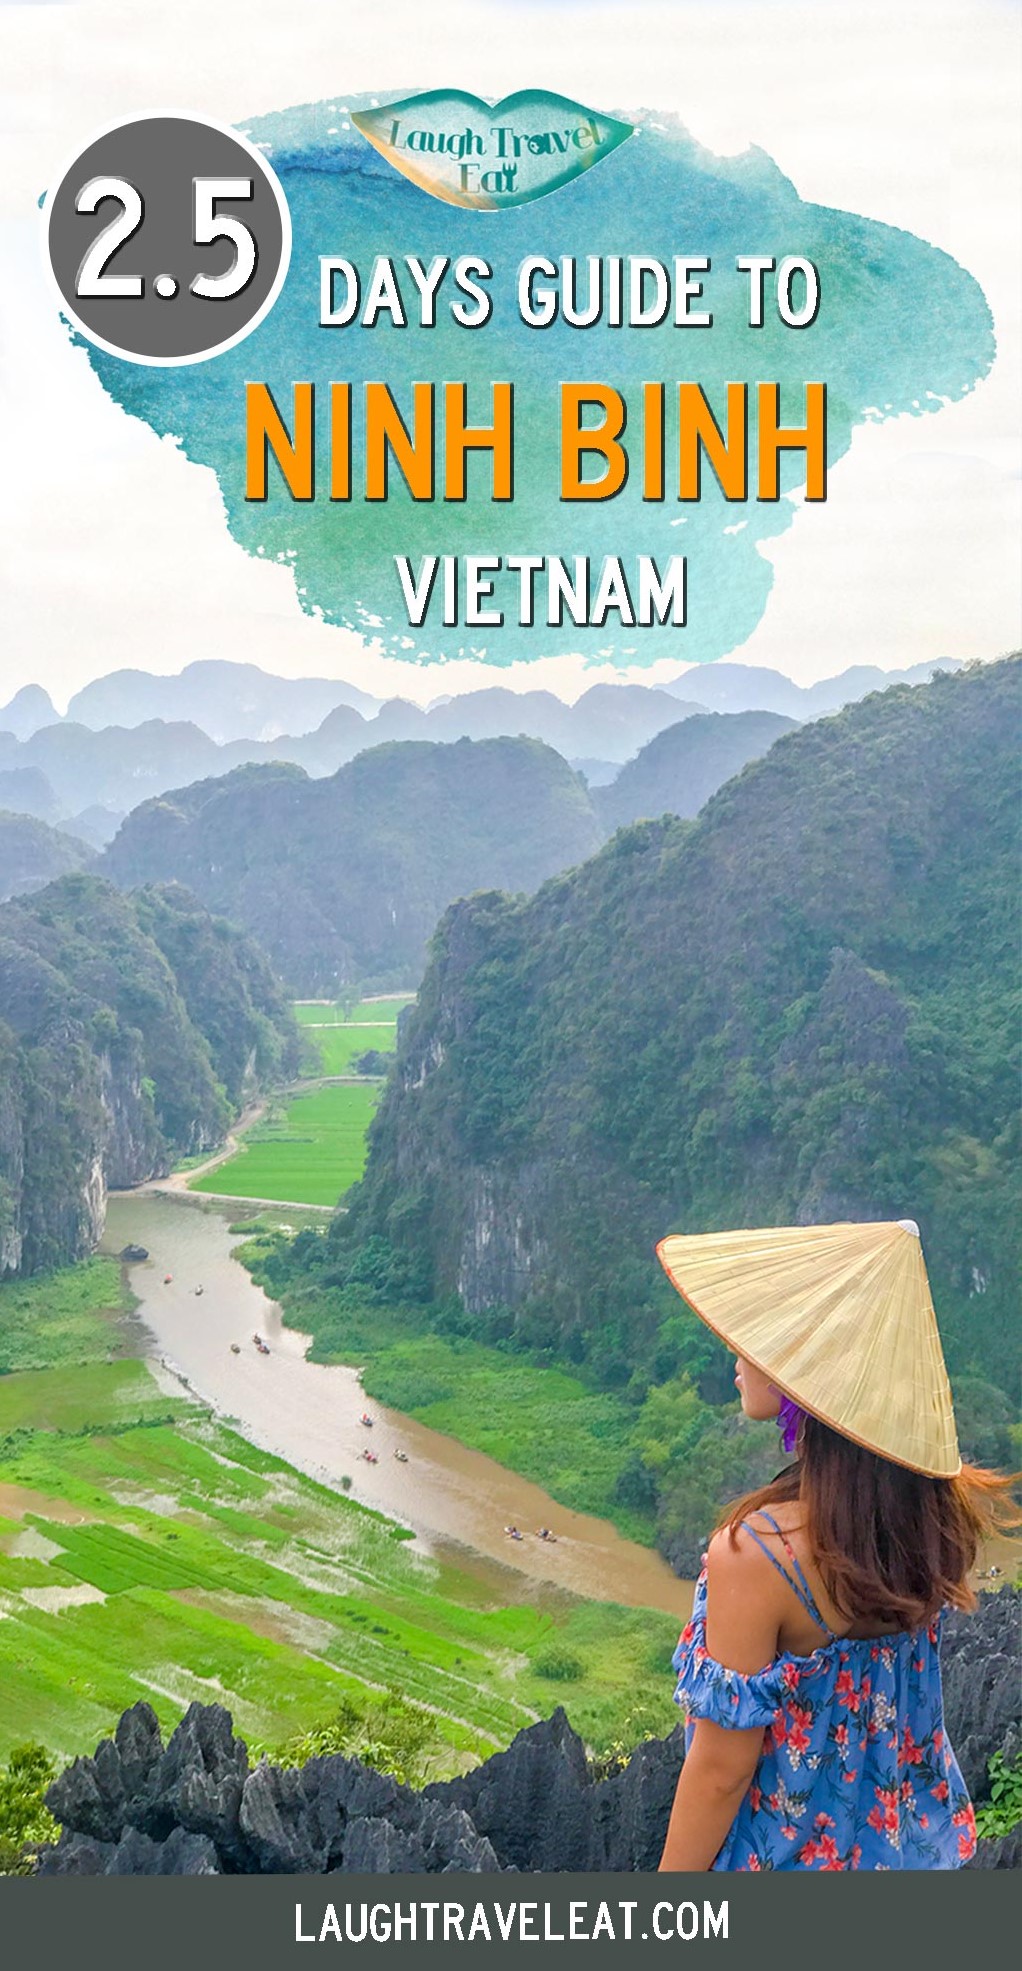 Two hours south of Hanoi, Ninh Binh is known as Halong Bay on land with the same beautiful karst mountains between rivers and rice paddies: #vietnam #ninhbinh